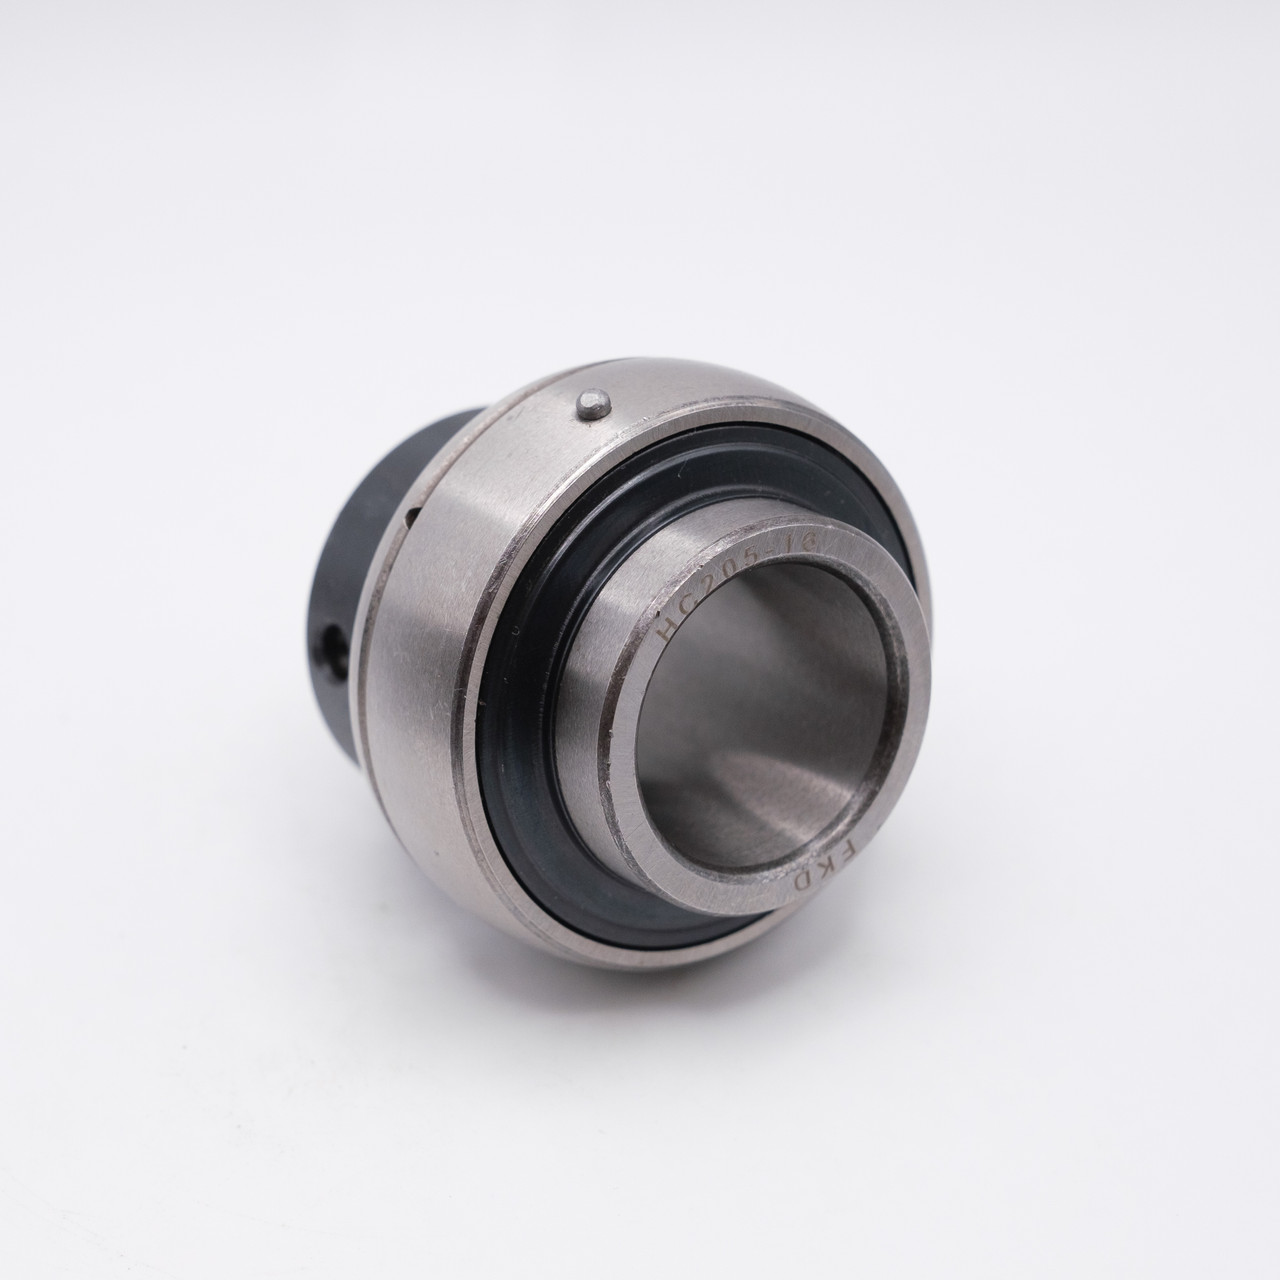 HC215-47 Eccentric Bore Insert Ball Bearing with Collar and Set Screw 2-15/16 Inch Shaft Back View